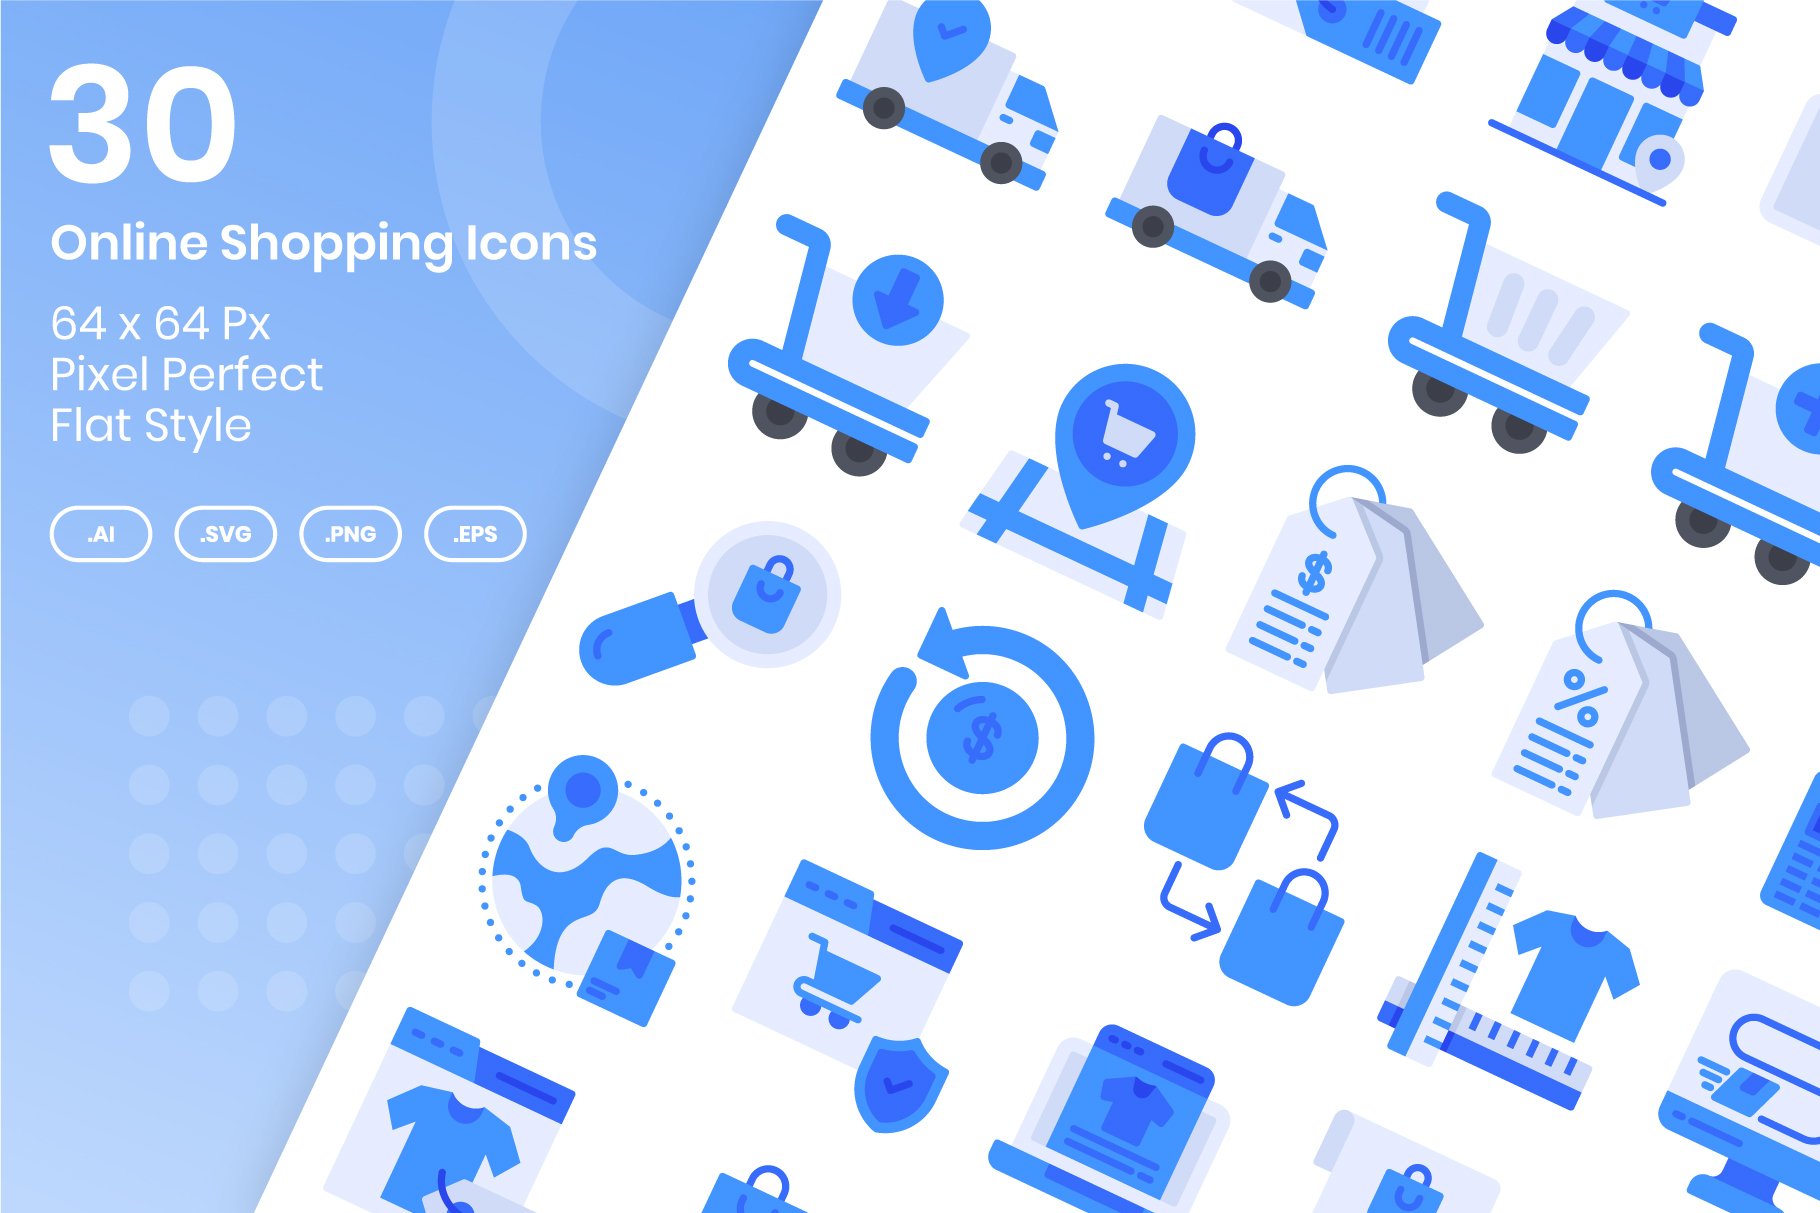 30 Online Shopping Icons Set - Flat cover image.